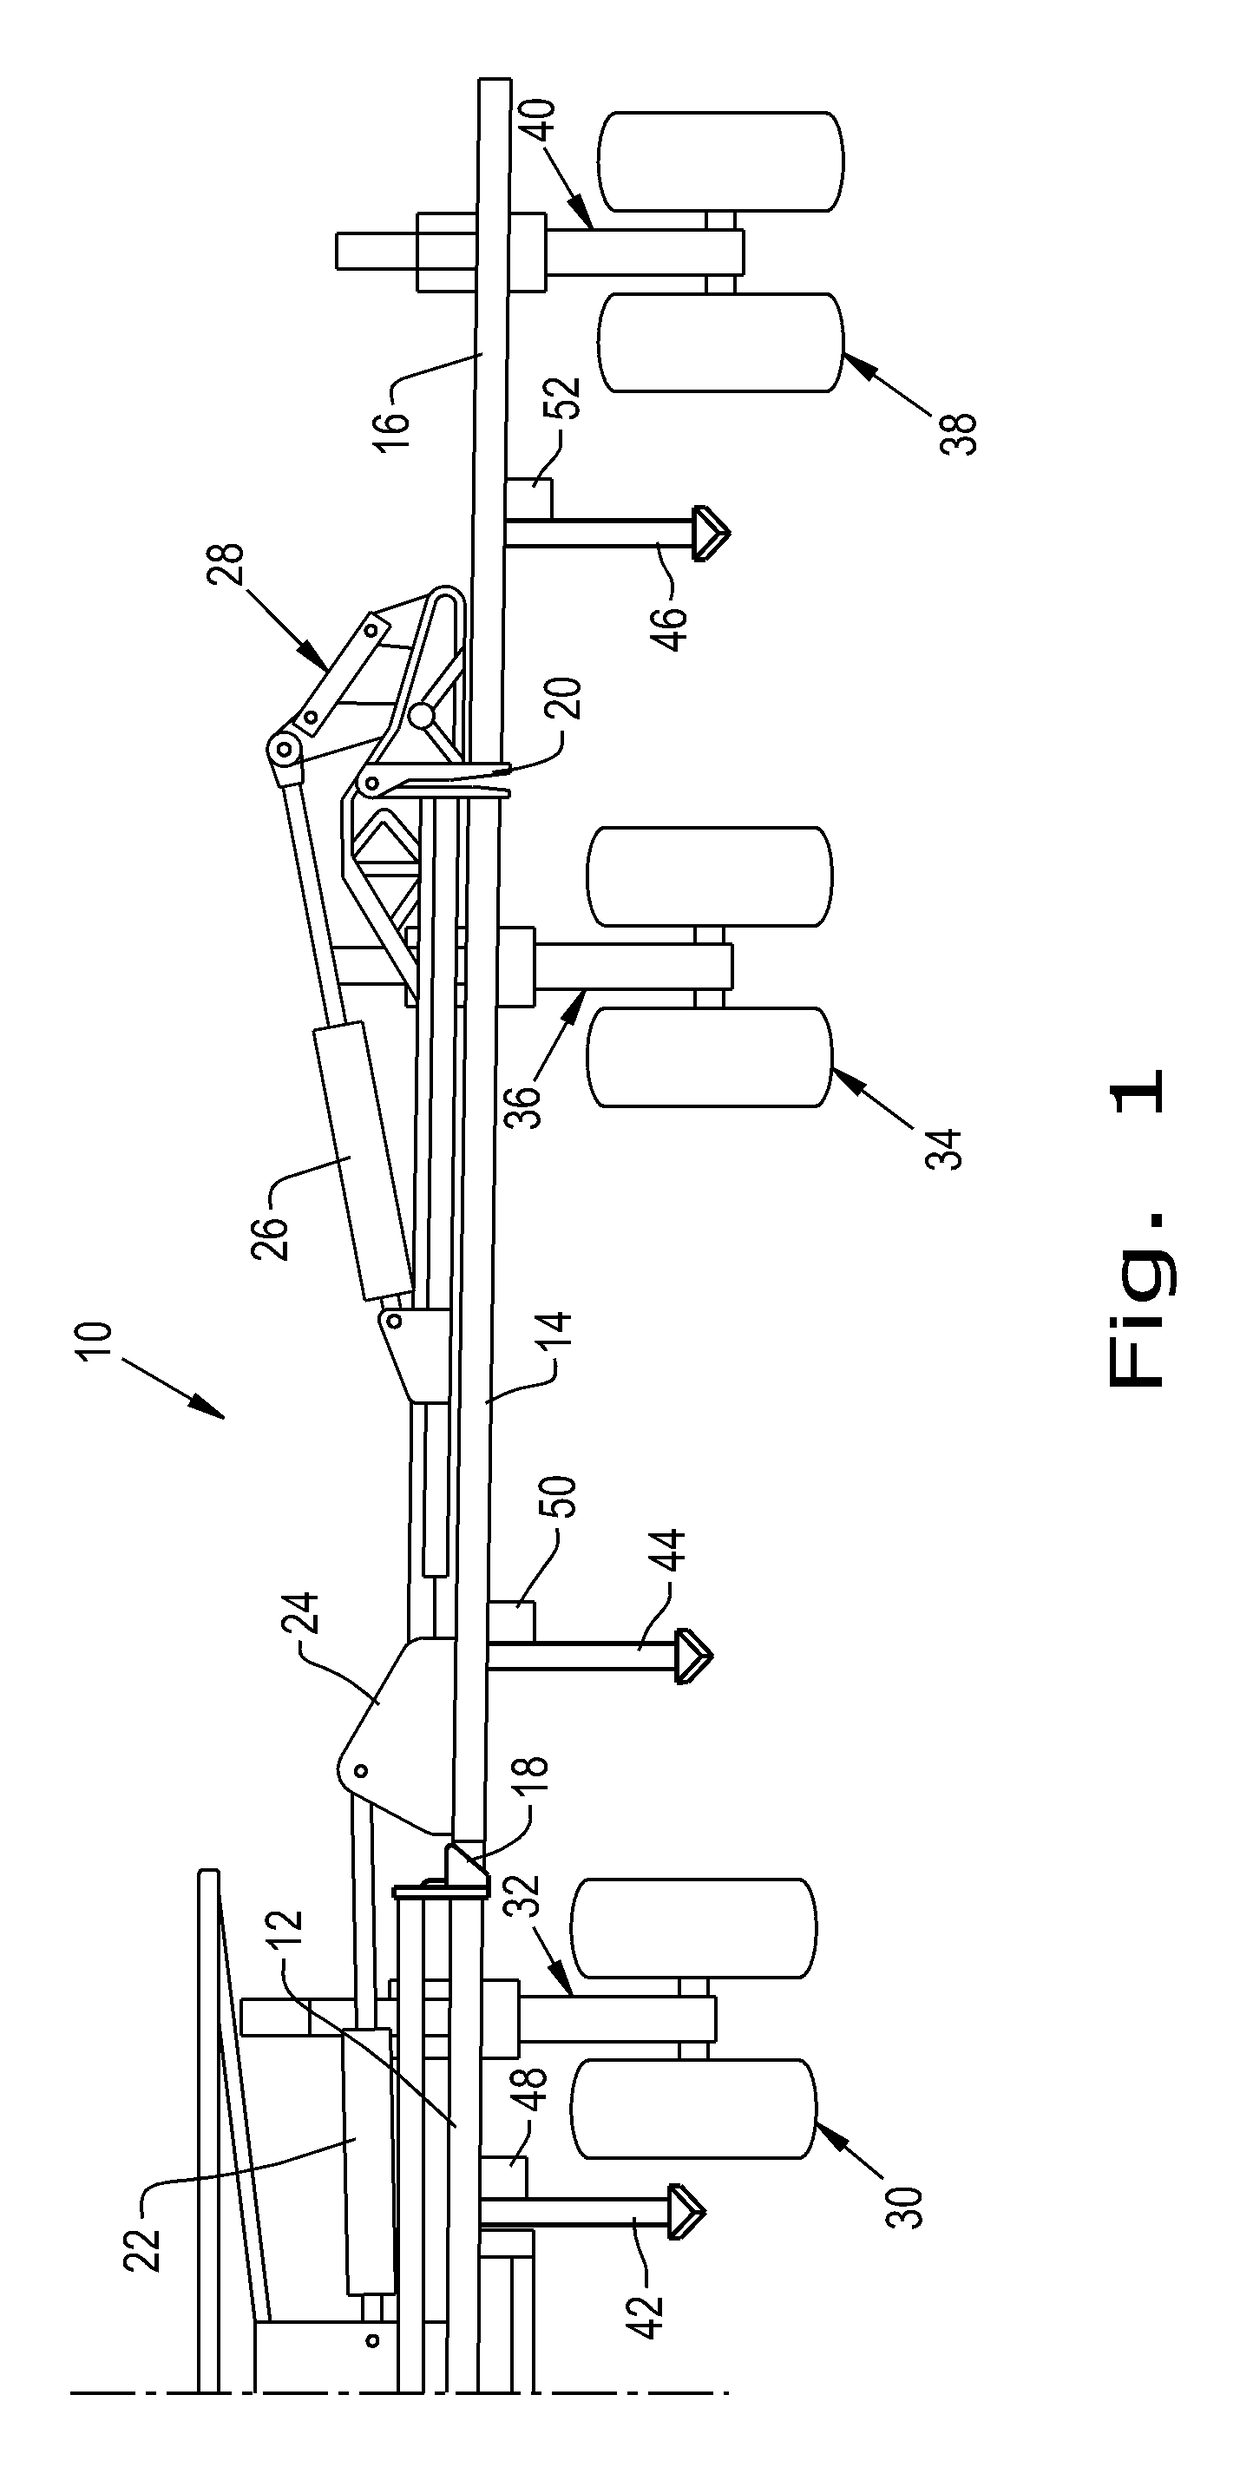 Apparatus and method to minimize transport dimensions of agricultural implements